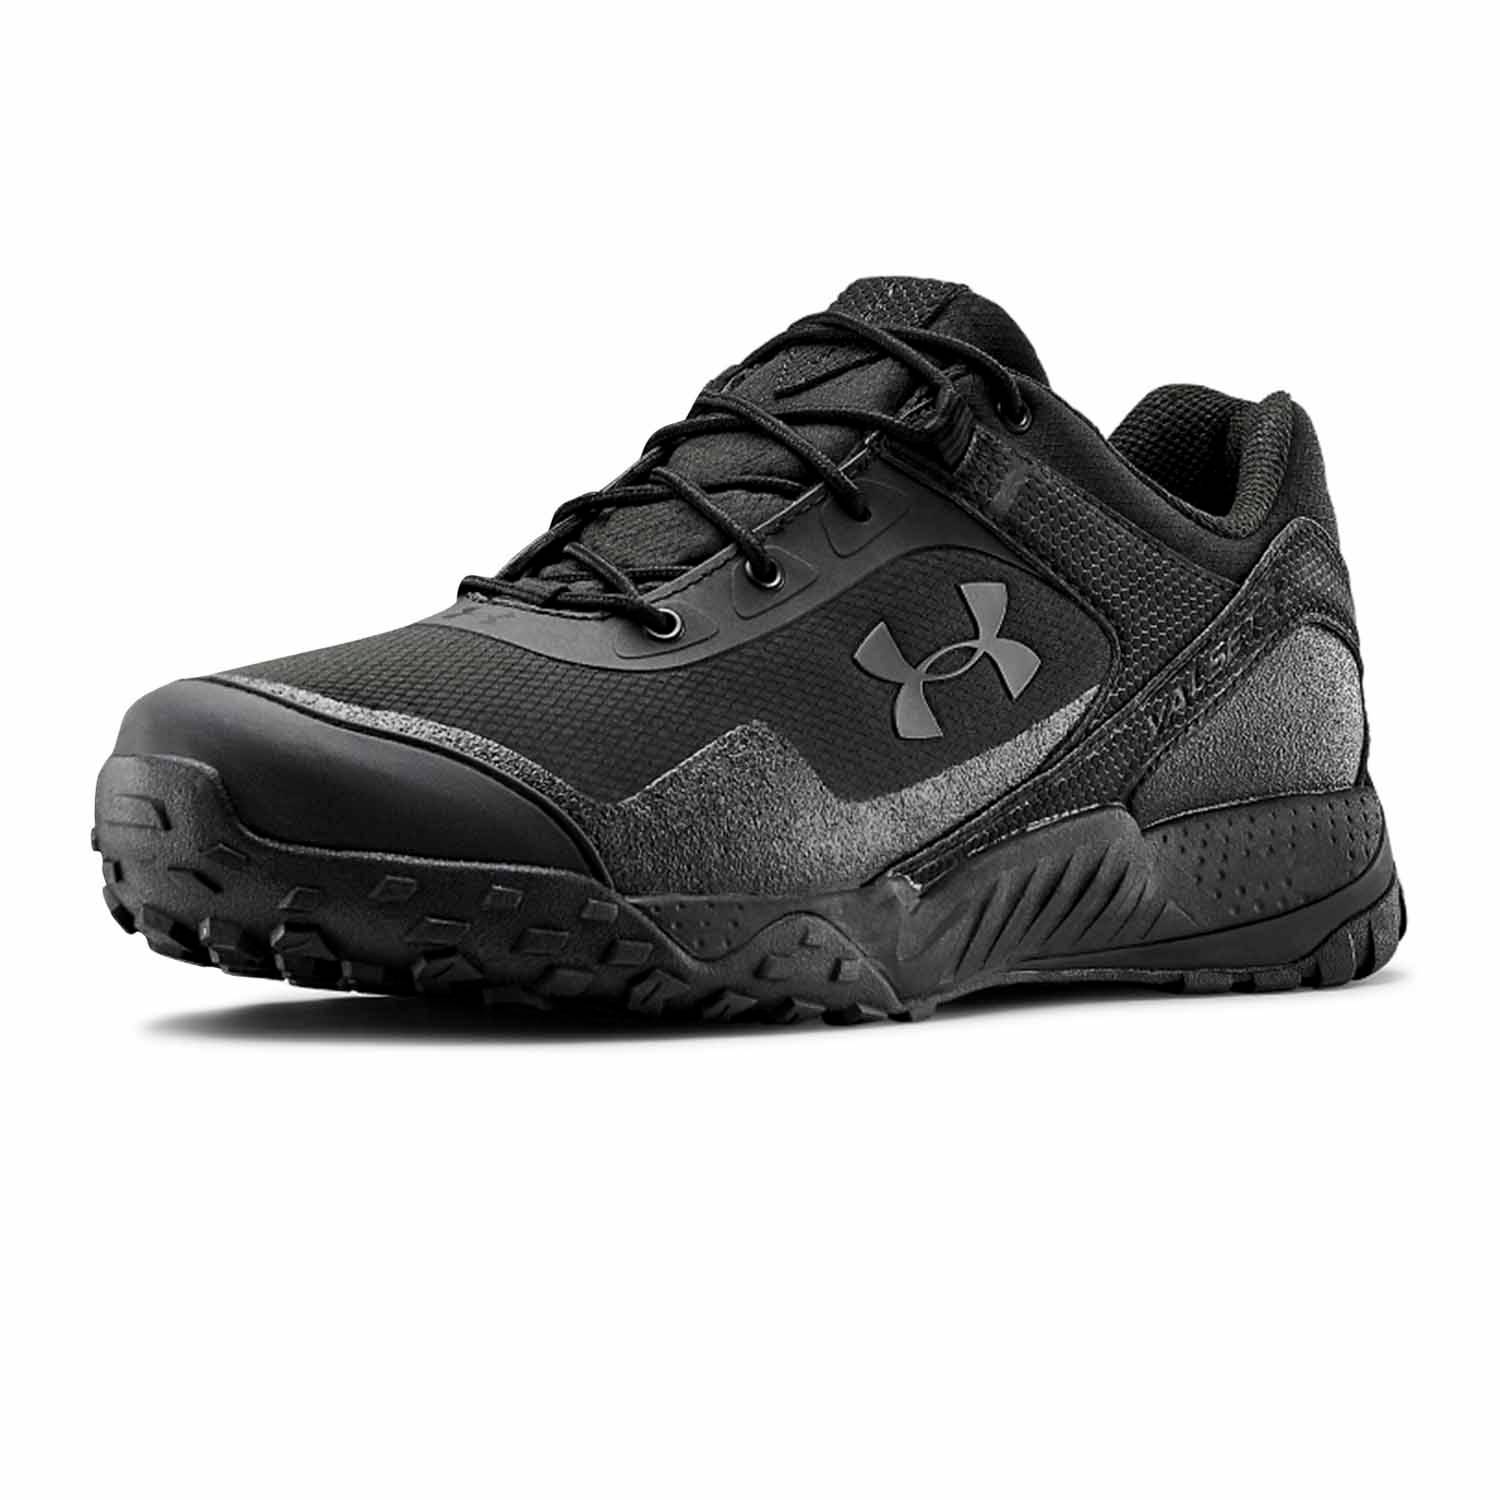 under armour shoes low price